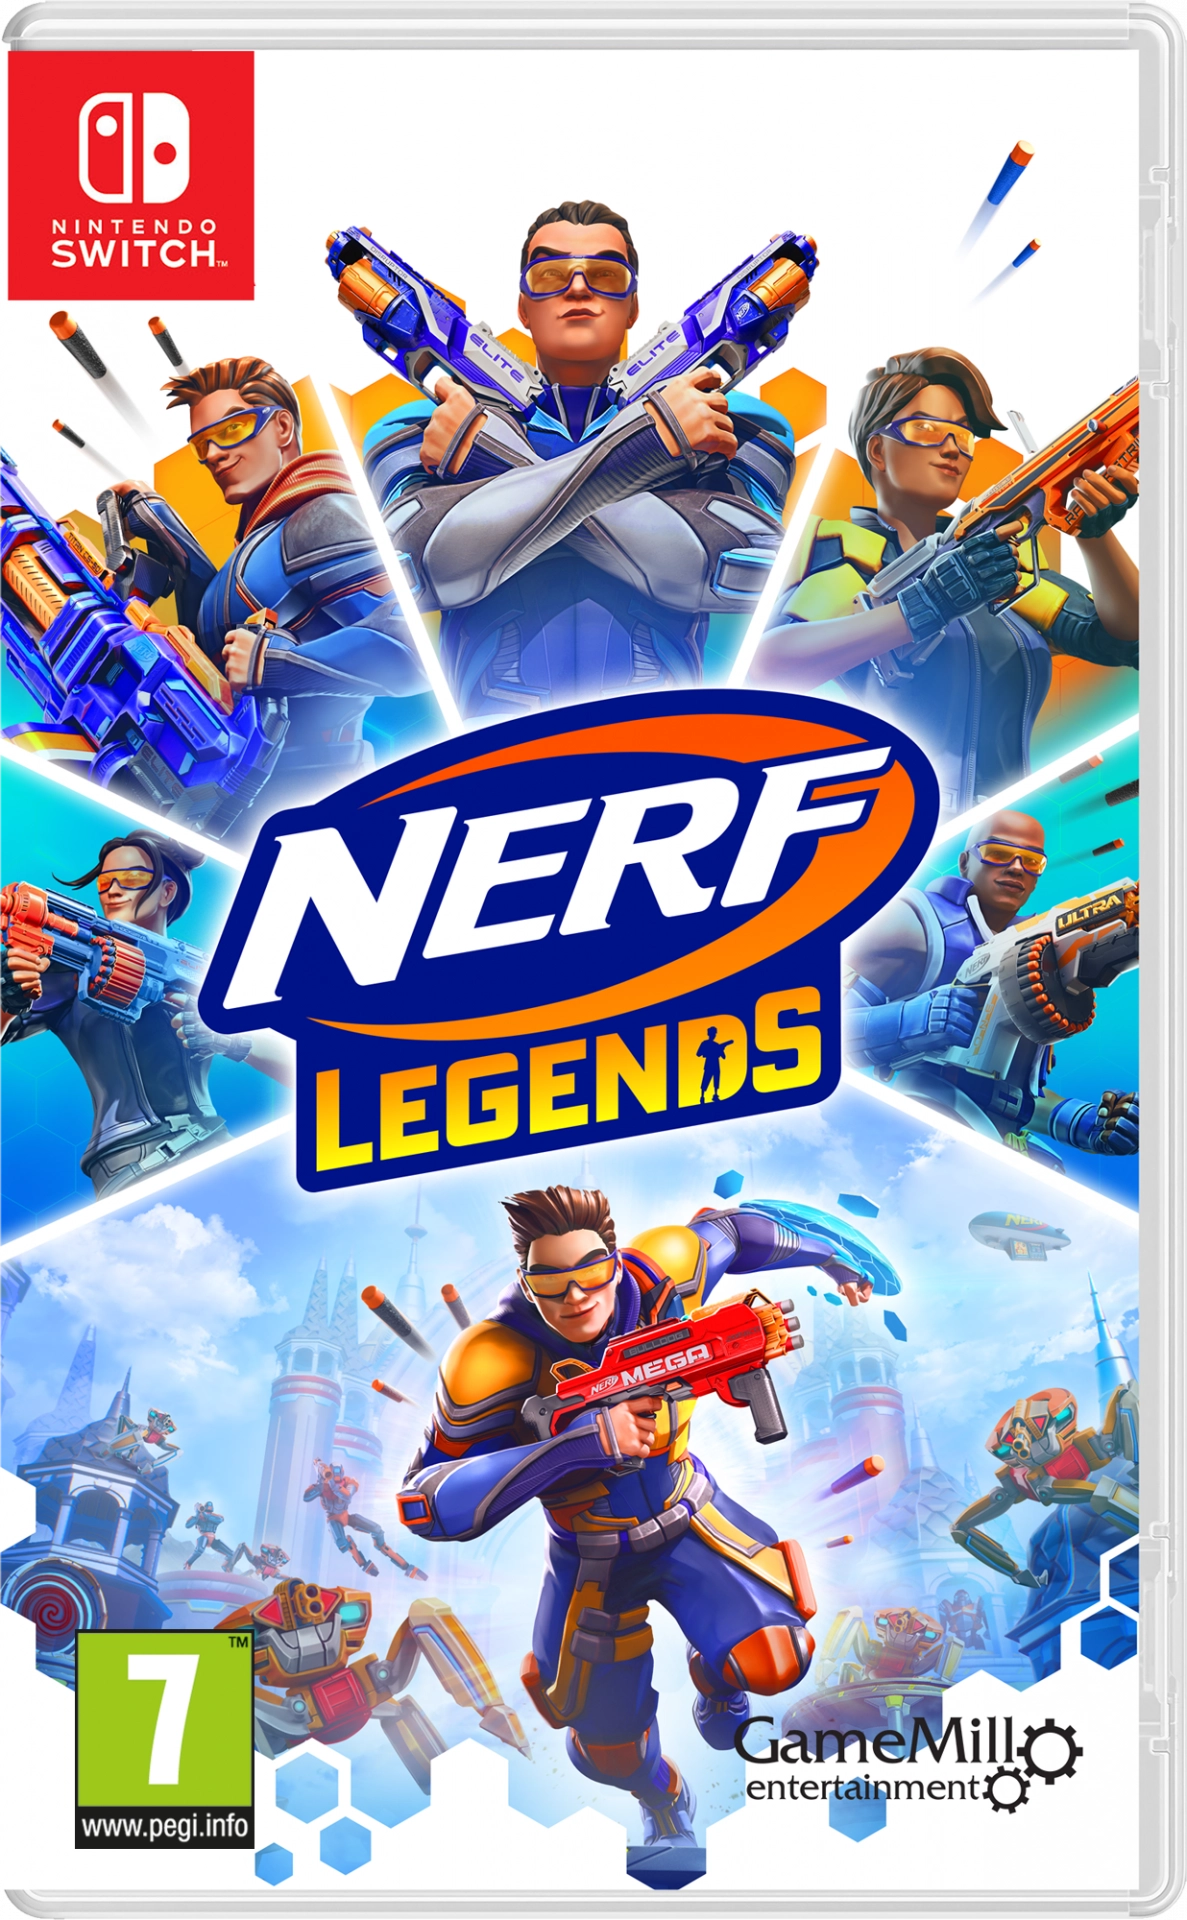 NERF Legends (Switch), GameMill Entertainment